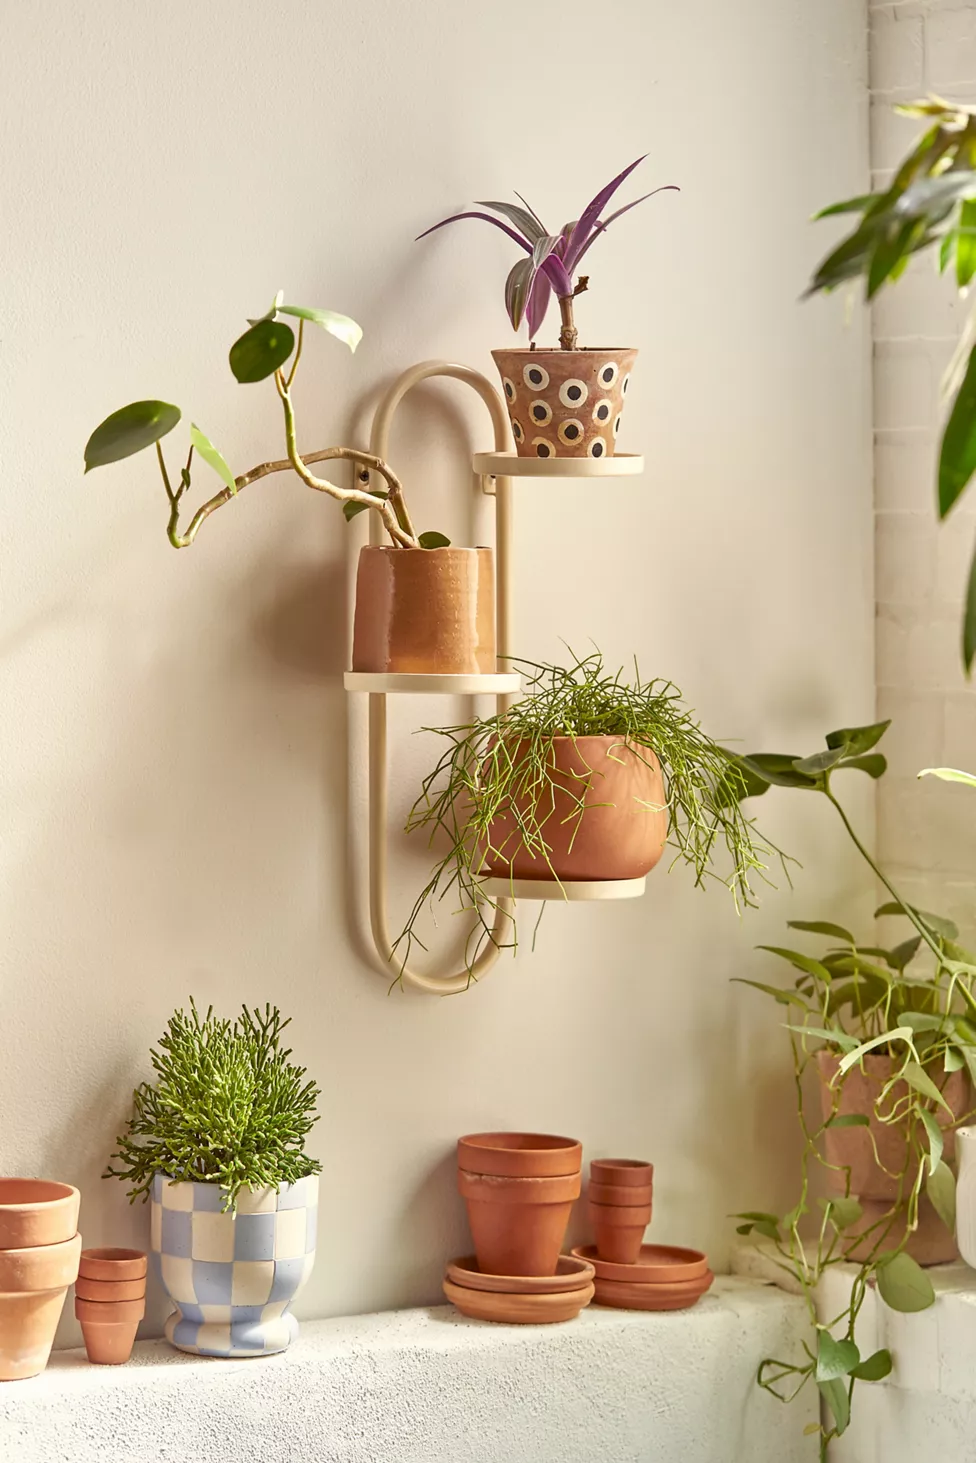 Add Greenery with a Wall Mounted Plant Stand